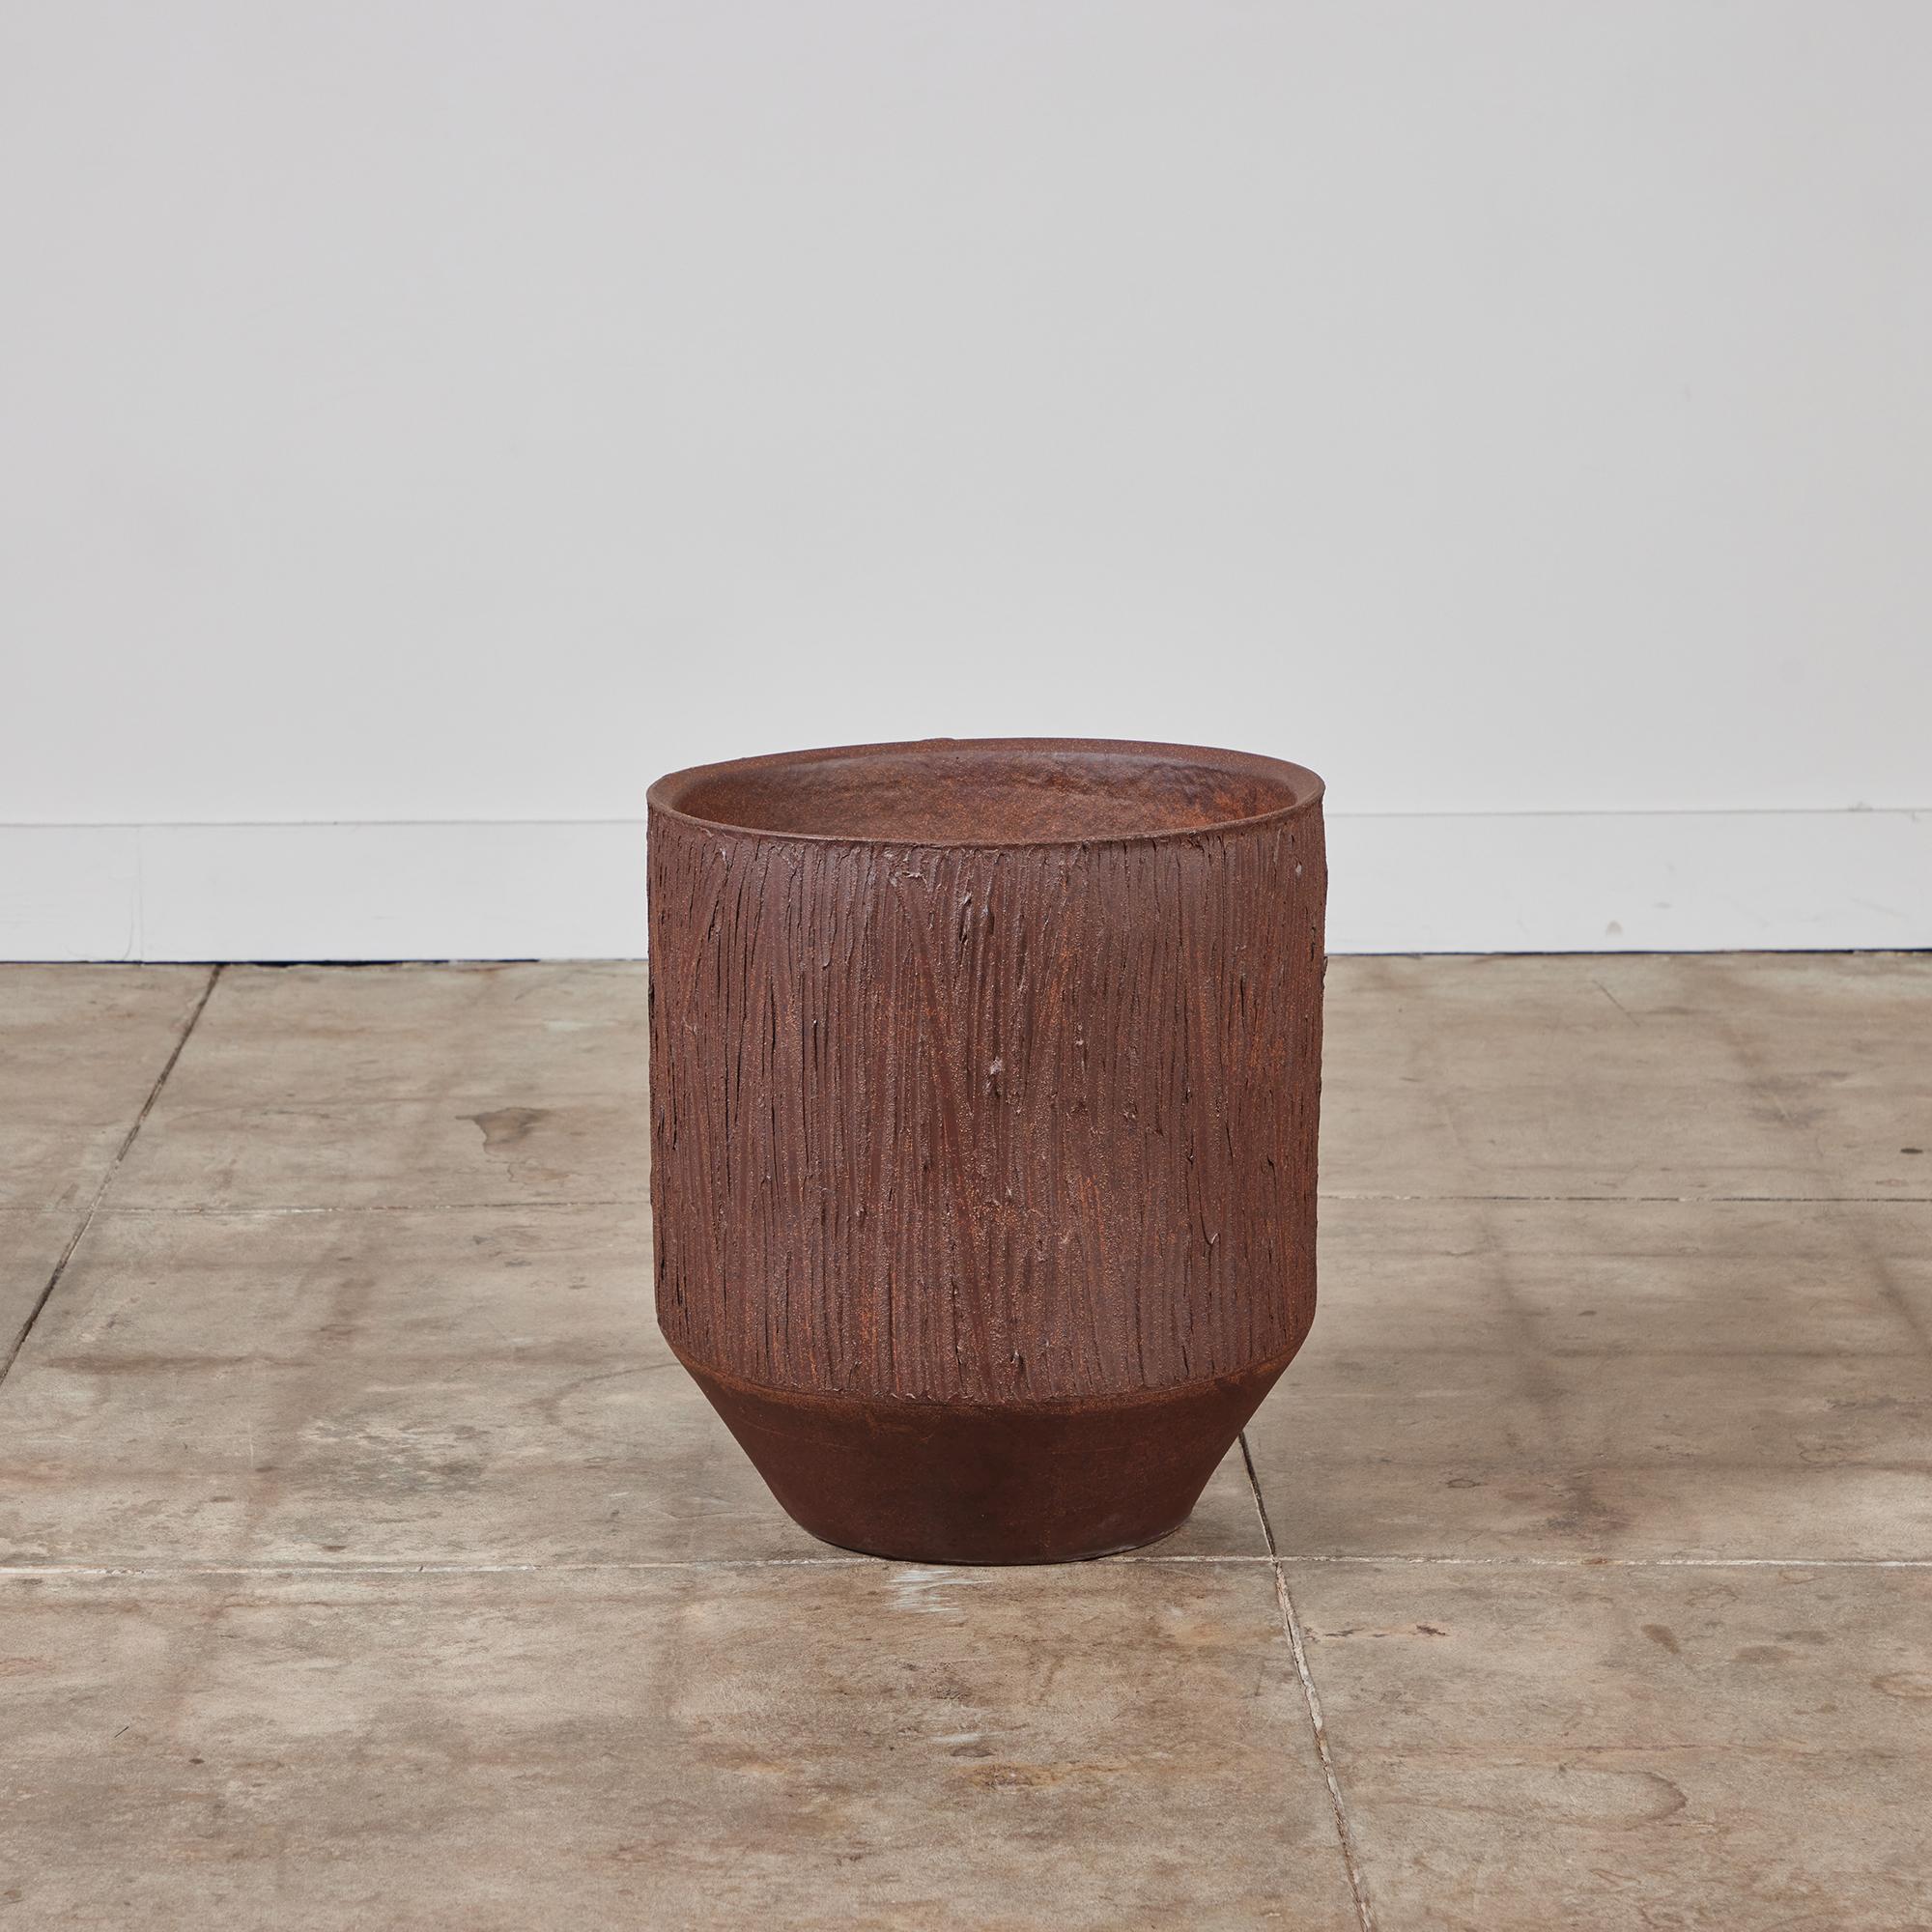 Bullet planter by David Cressey from the Pro/Artisan collection for Architectural Pottery. This stoneware planter has an unglazed interior as well as an unglazed natural warm brown clay exterior with the iconic 